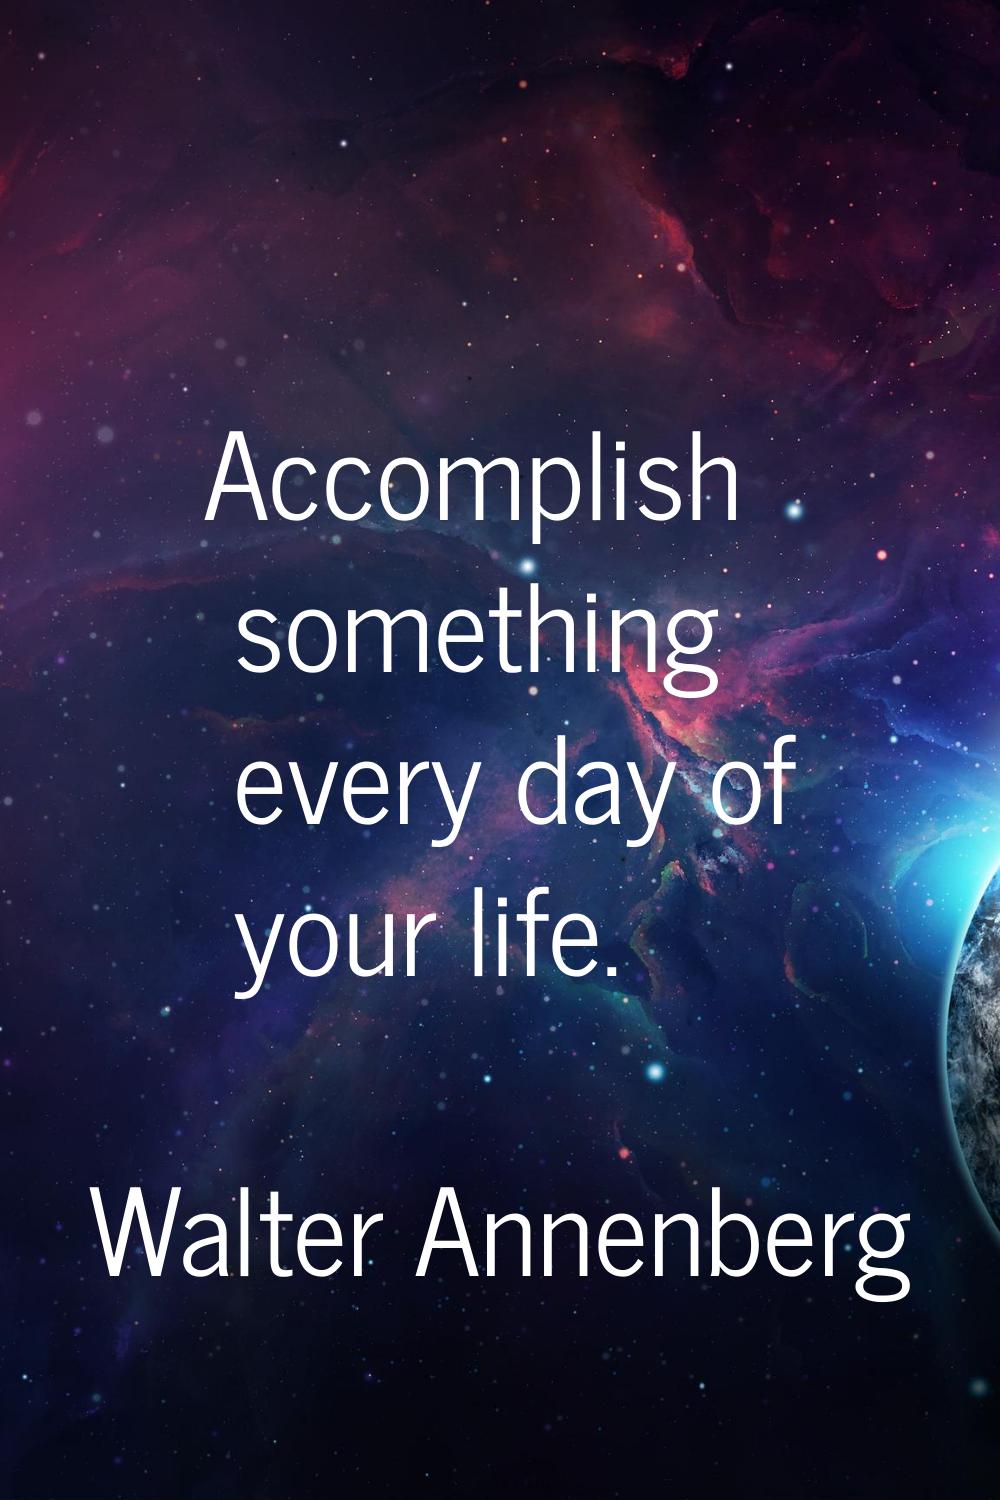 Accomplish something every day of your life.